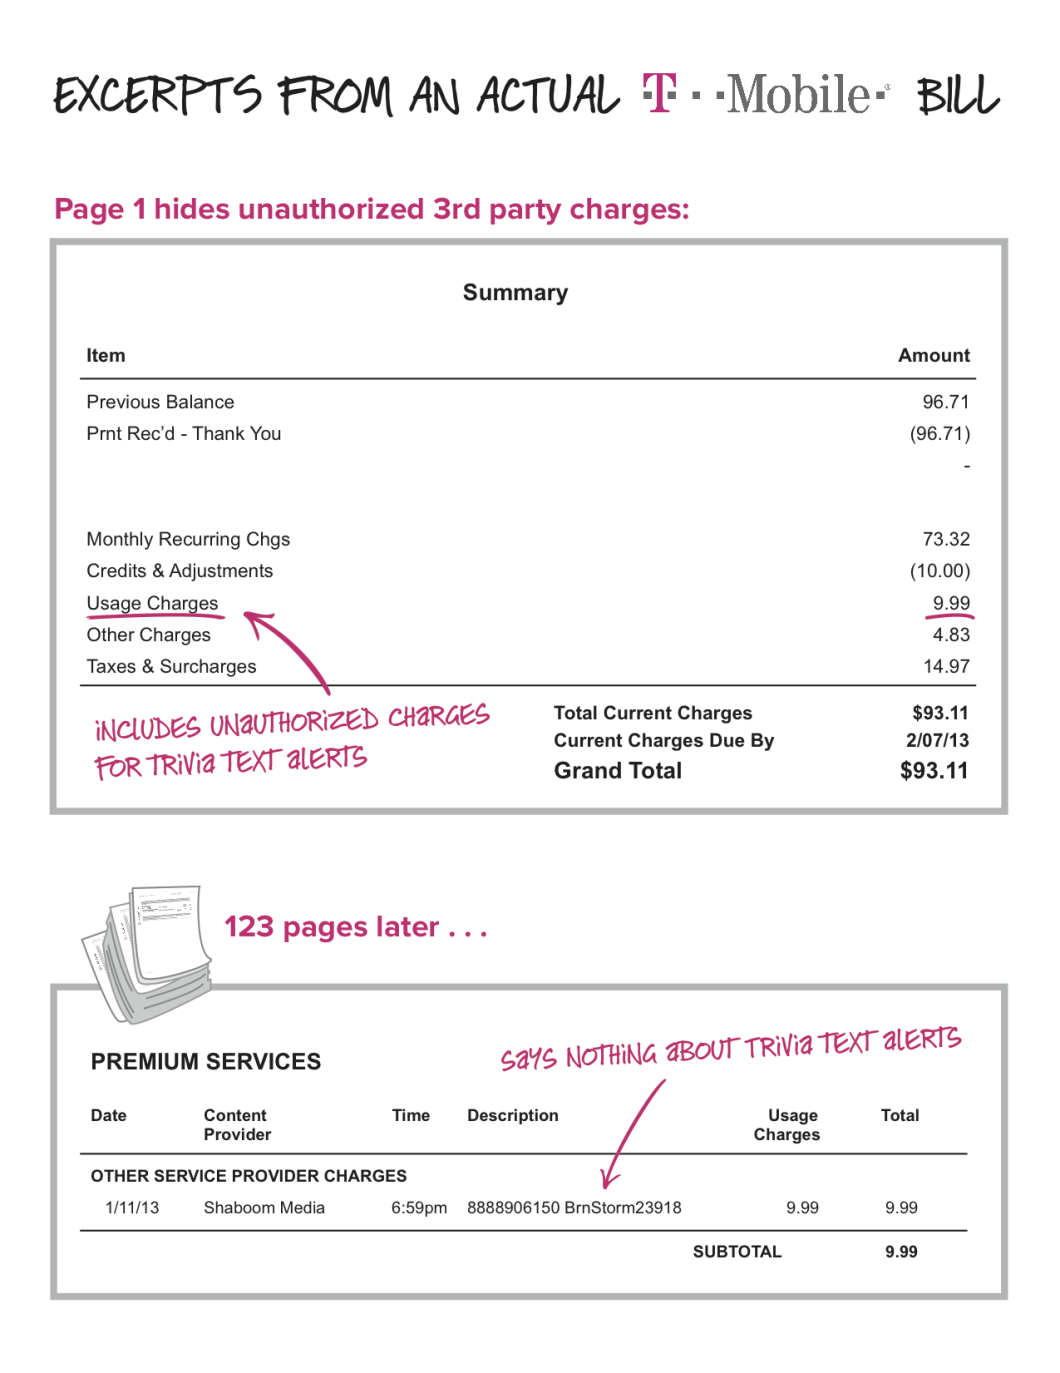 This sample provided by the FTC demonstrates how T-Mobile allegedly hid these charges from consumers.